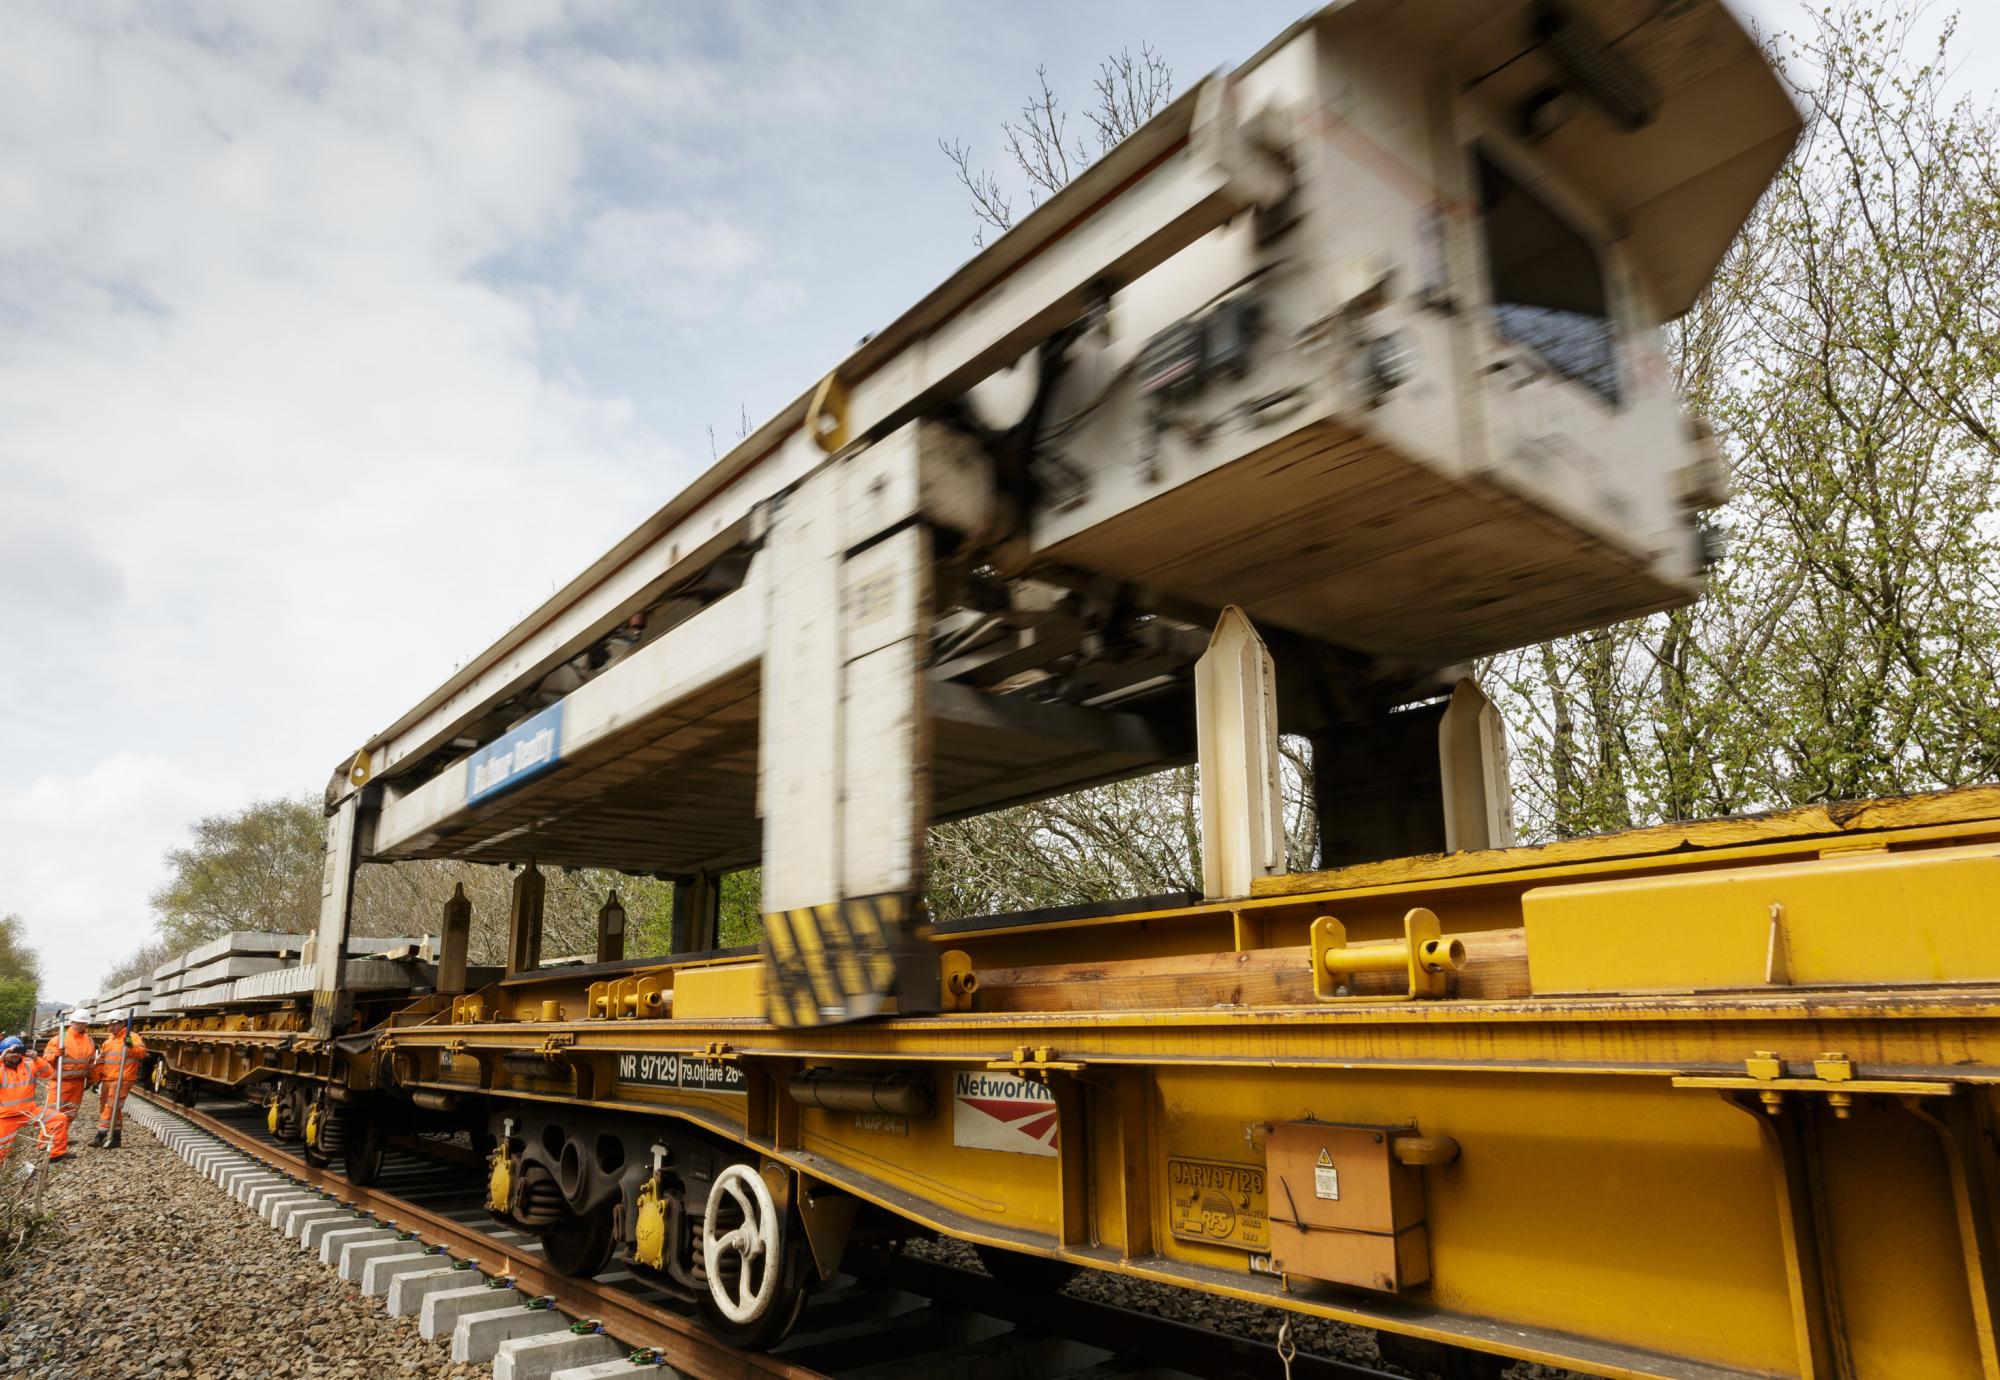 The NTC (new track construction) machine in action on the Dartmoor Line, via Network Rail 